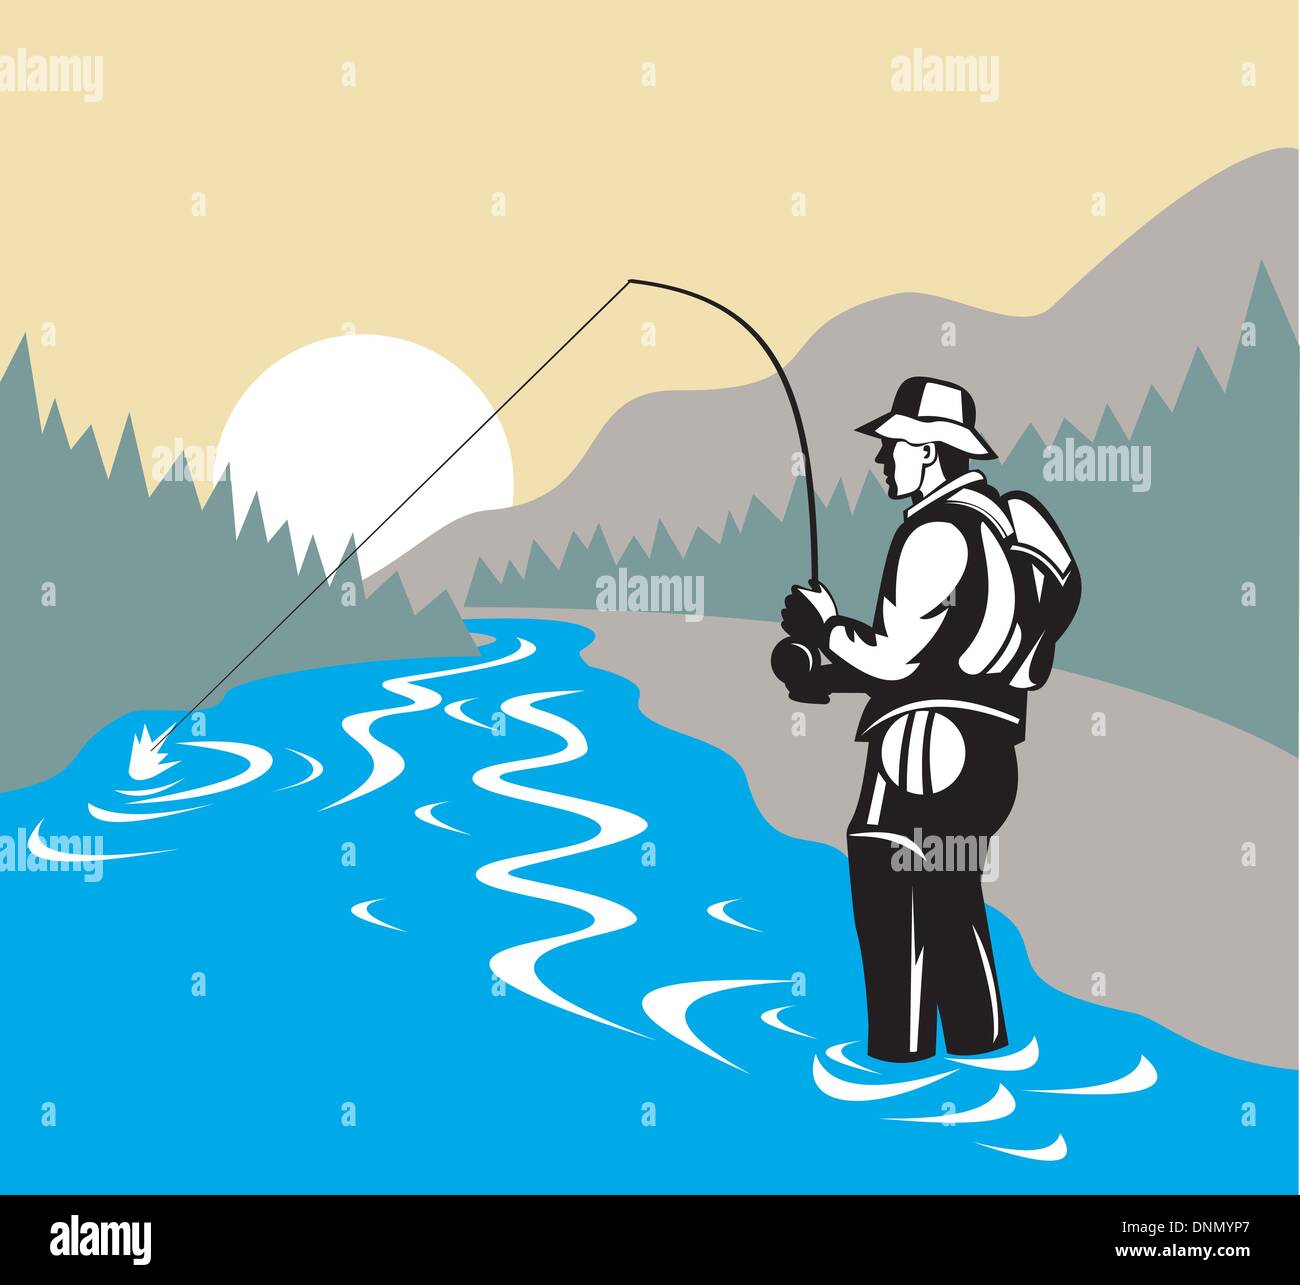 https://c8.alamy.com/comp/DNMYP7/illustration-of-a-fly-fisherman-casting-rod-and-reel-done-in-retro-DNMYP7.jpg